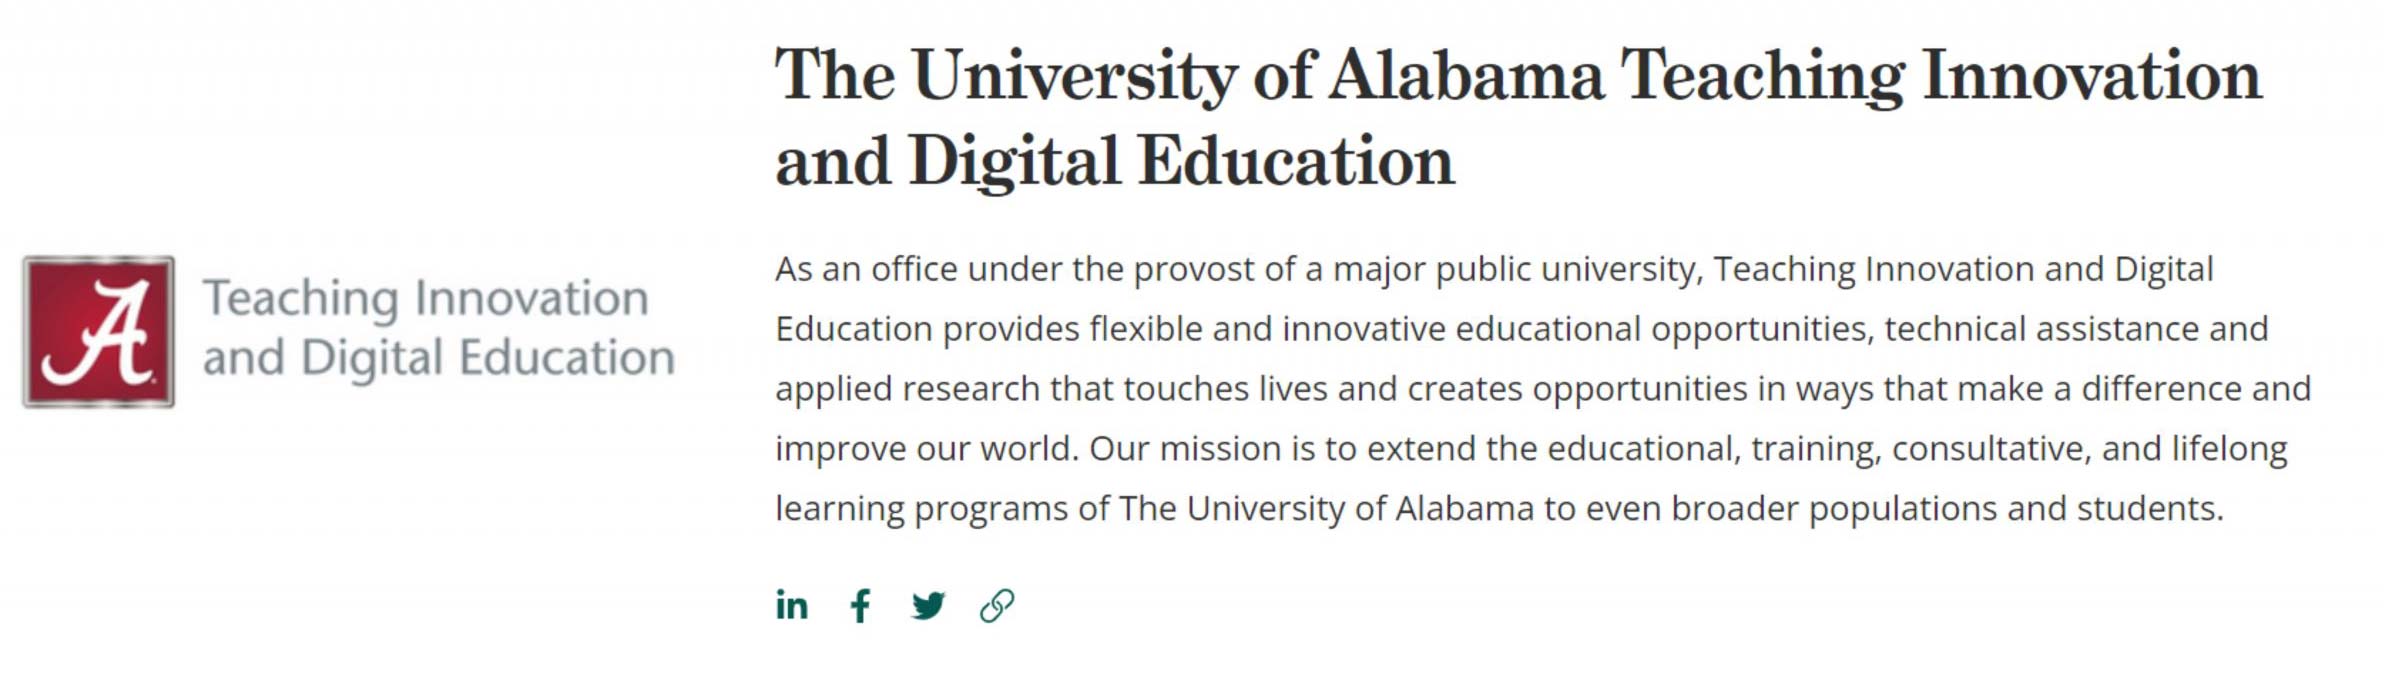 Credly Profile - As an office under the provost of a major public university, Teaching Innovation and Digital Education provides flexible and innovative educational opportunities, technical assistance and applied research that touches lives and creates opportunities in ways that make a difference and improve our world. Our mission is to extend the educational, training, consultive, and lifelong learning programs of The University of Alabama to even broader populations and students.